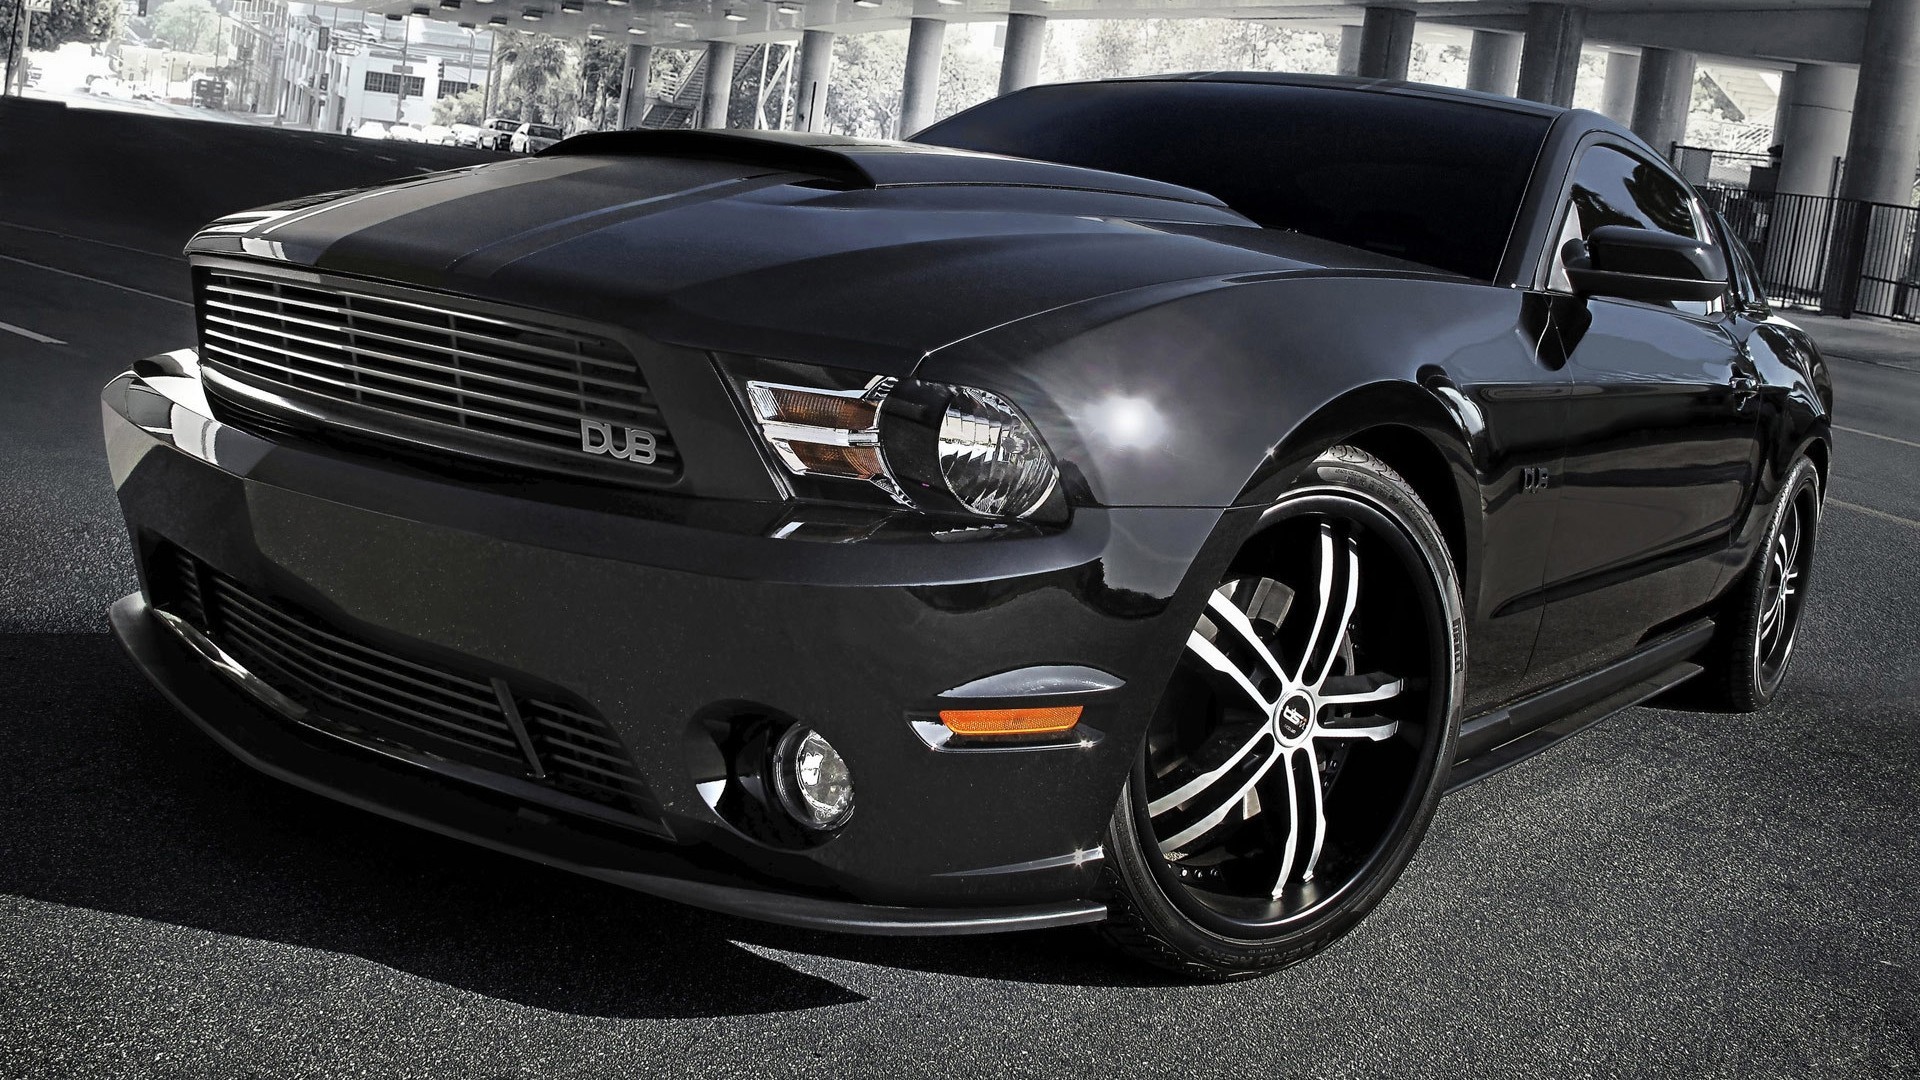 General 1920x1080 Ford Ford Mustang black cars vehicle car Ford Mustang S-197 II muscle cars American cars